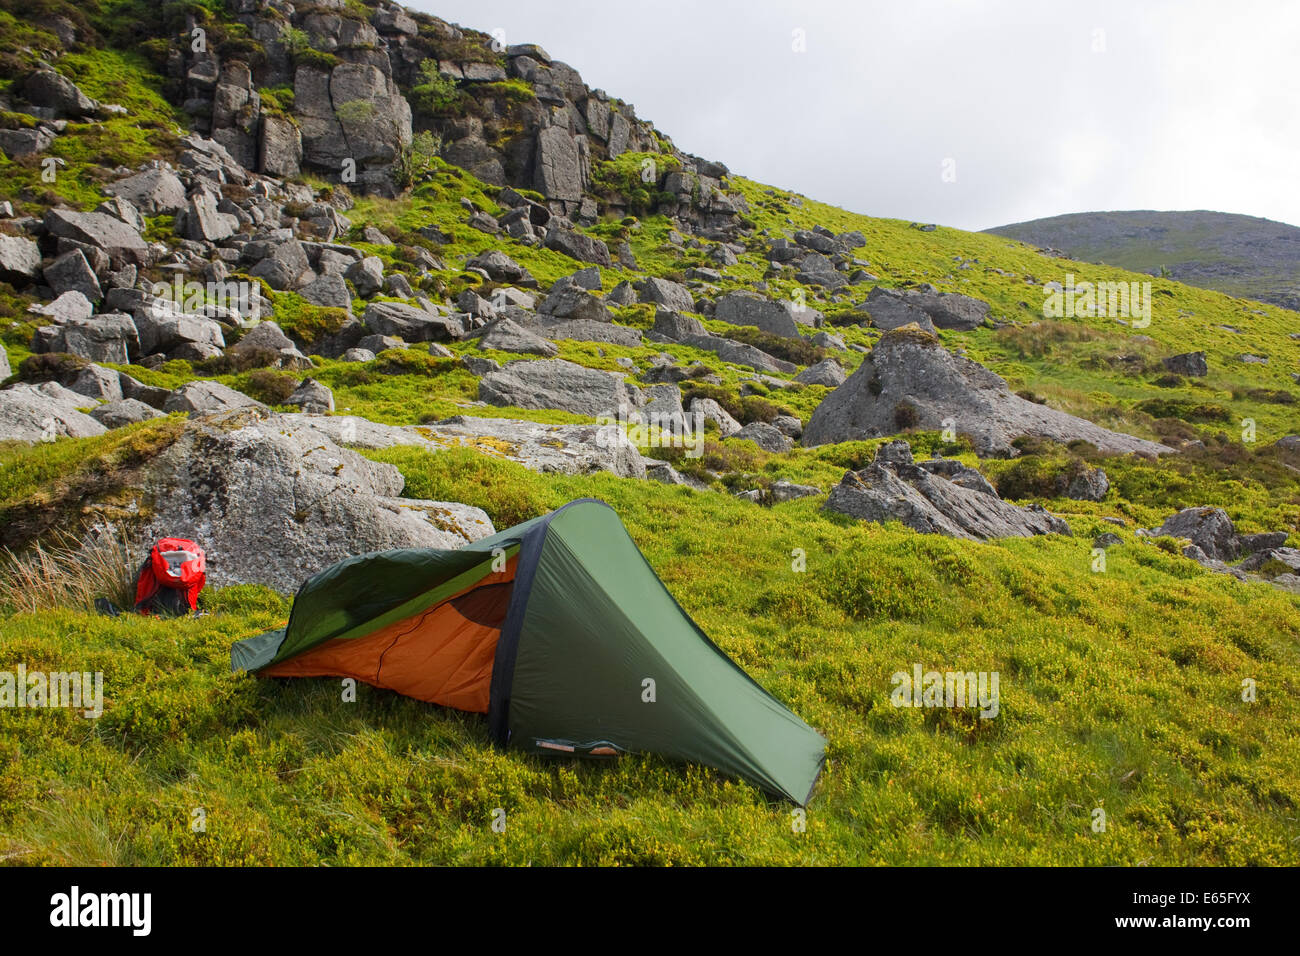 A tent pitched in a wild campsite in the mountains below a rocky slope Stock Photo